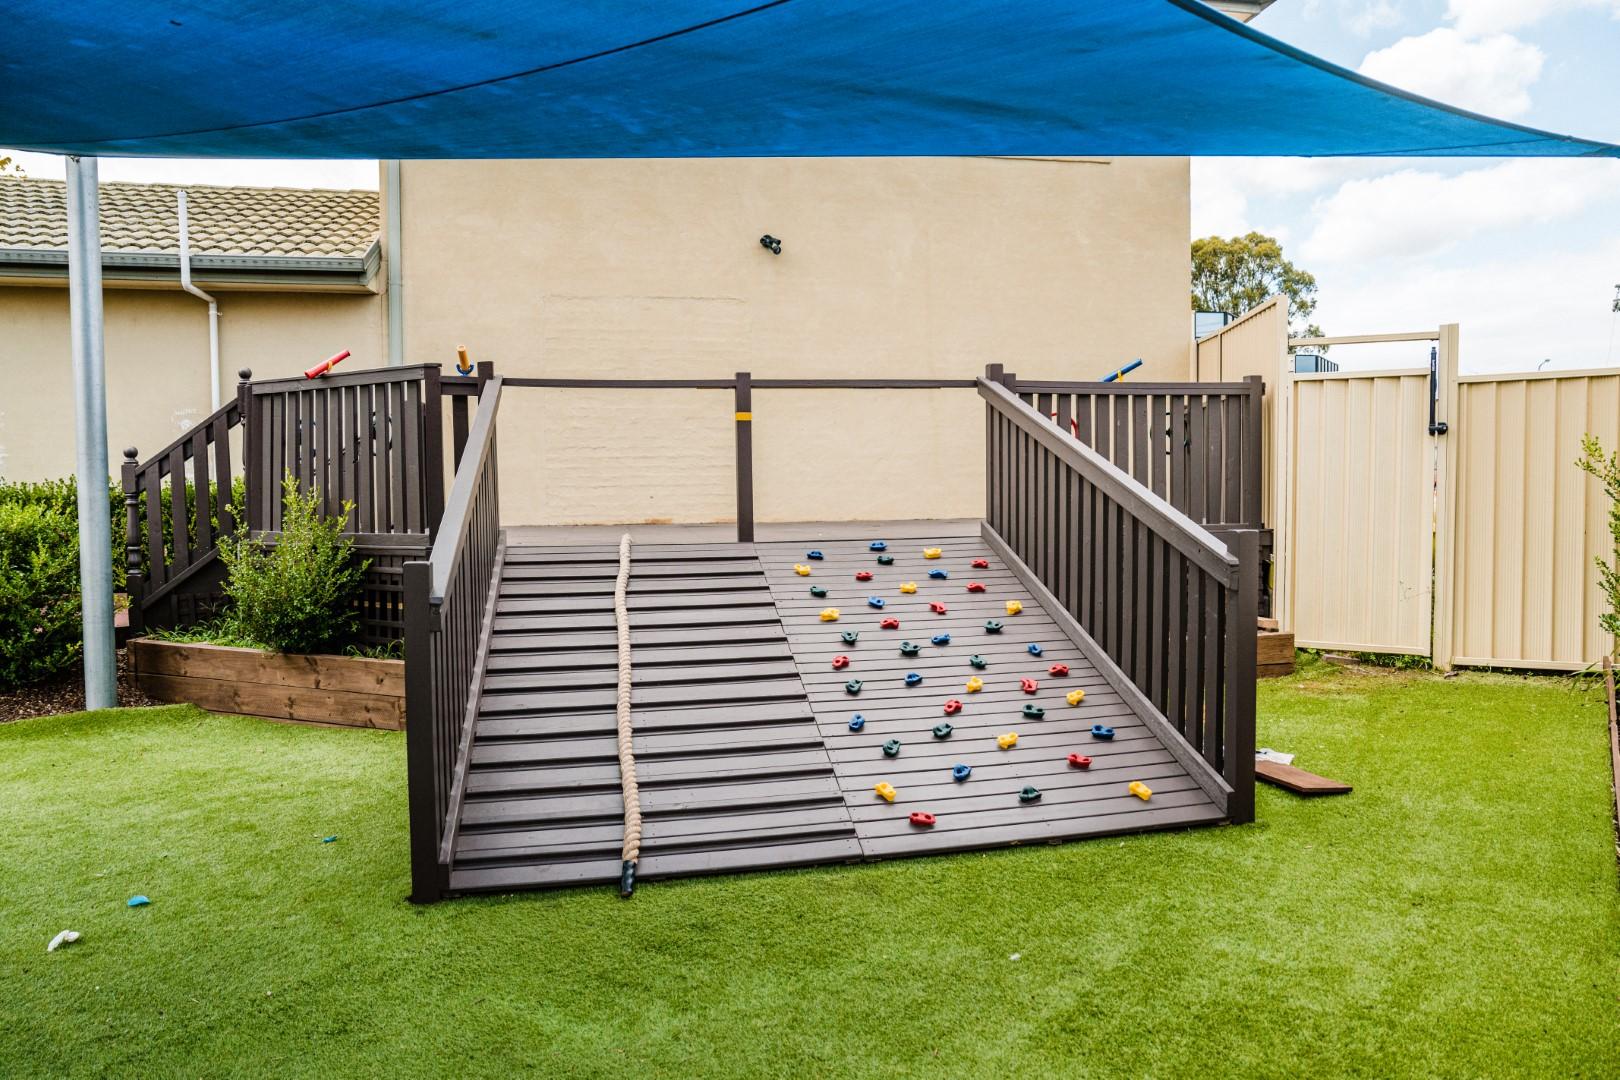 Images Young Academics Early Learning Centre - Narellan